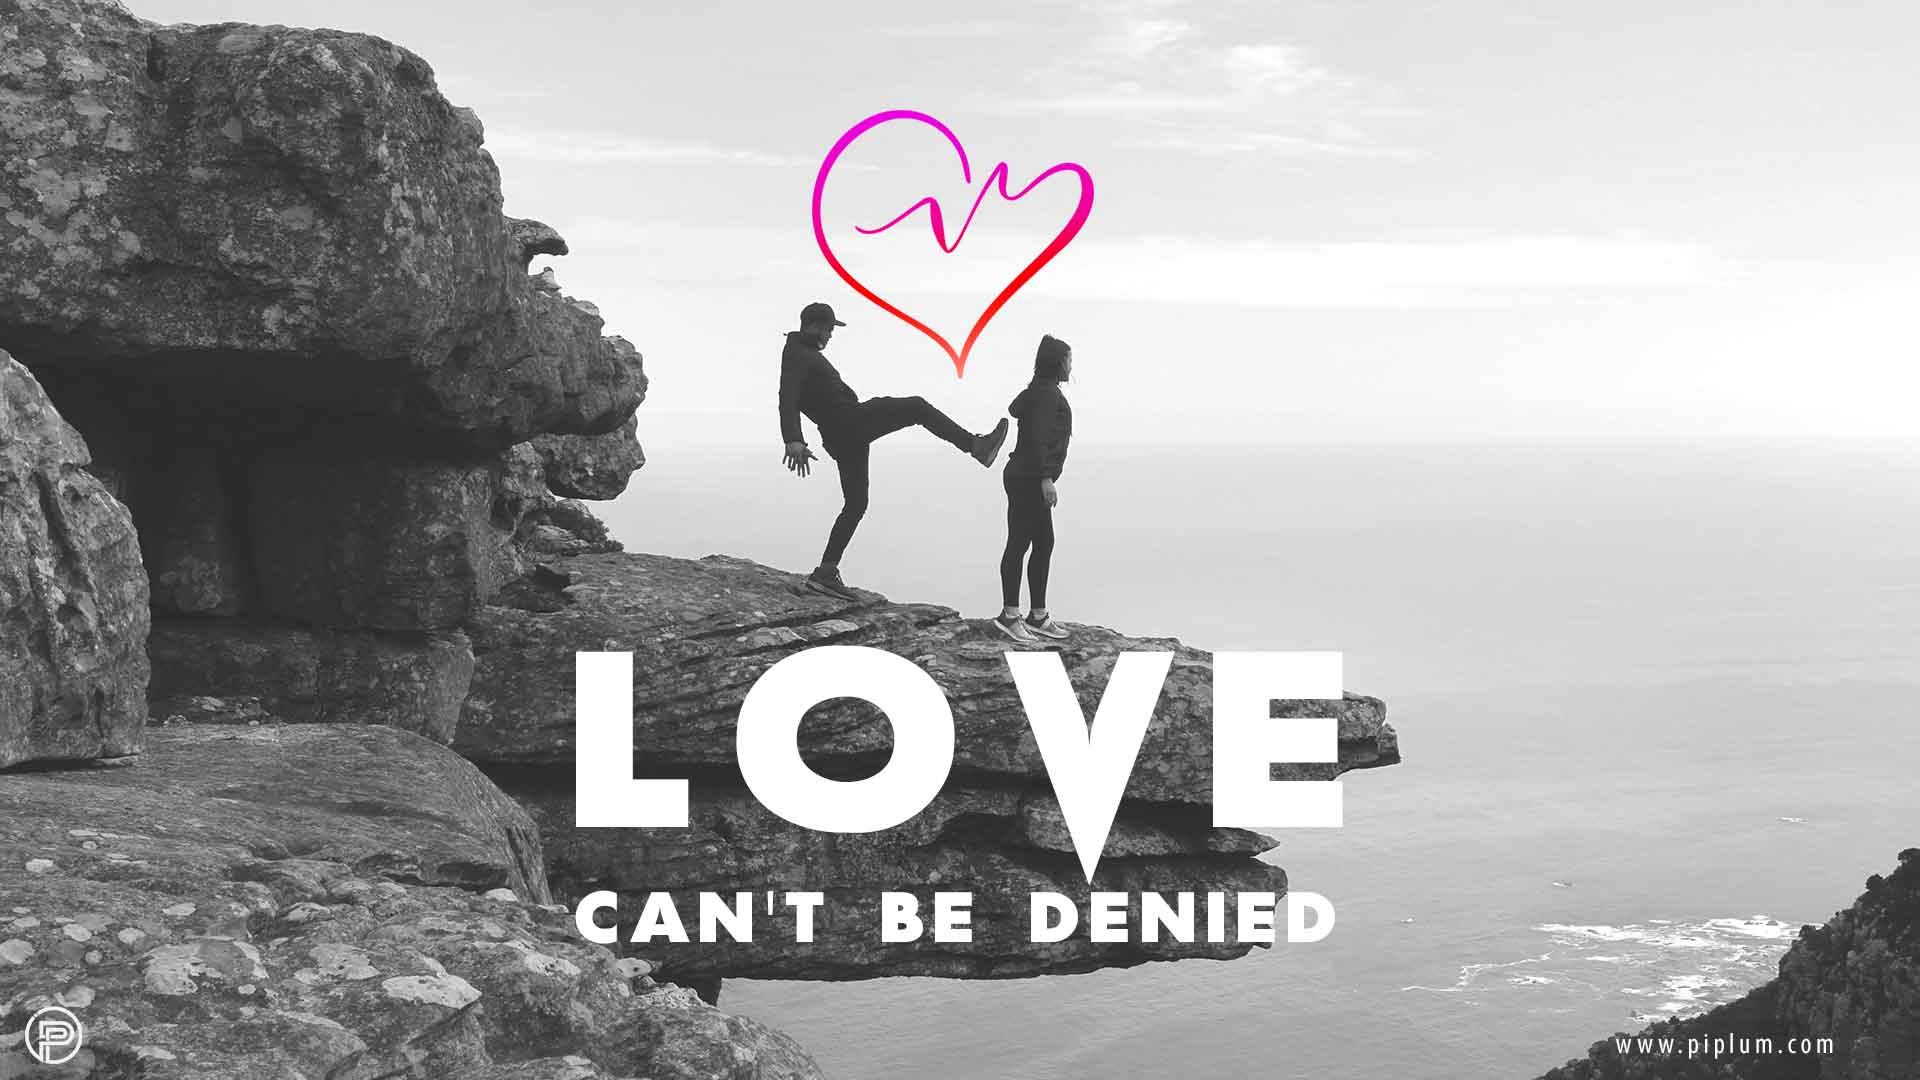 Love-Can't-Be-Denied-couple-goals-quote